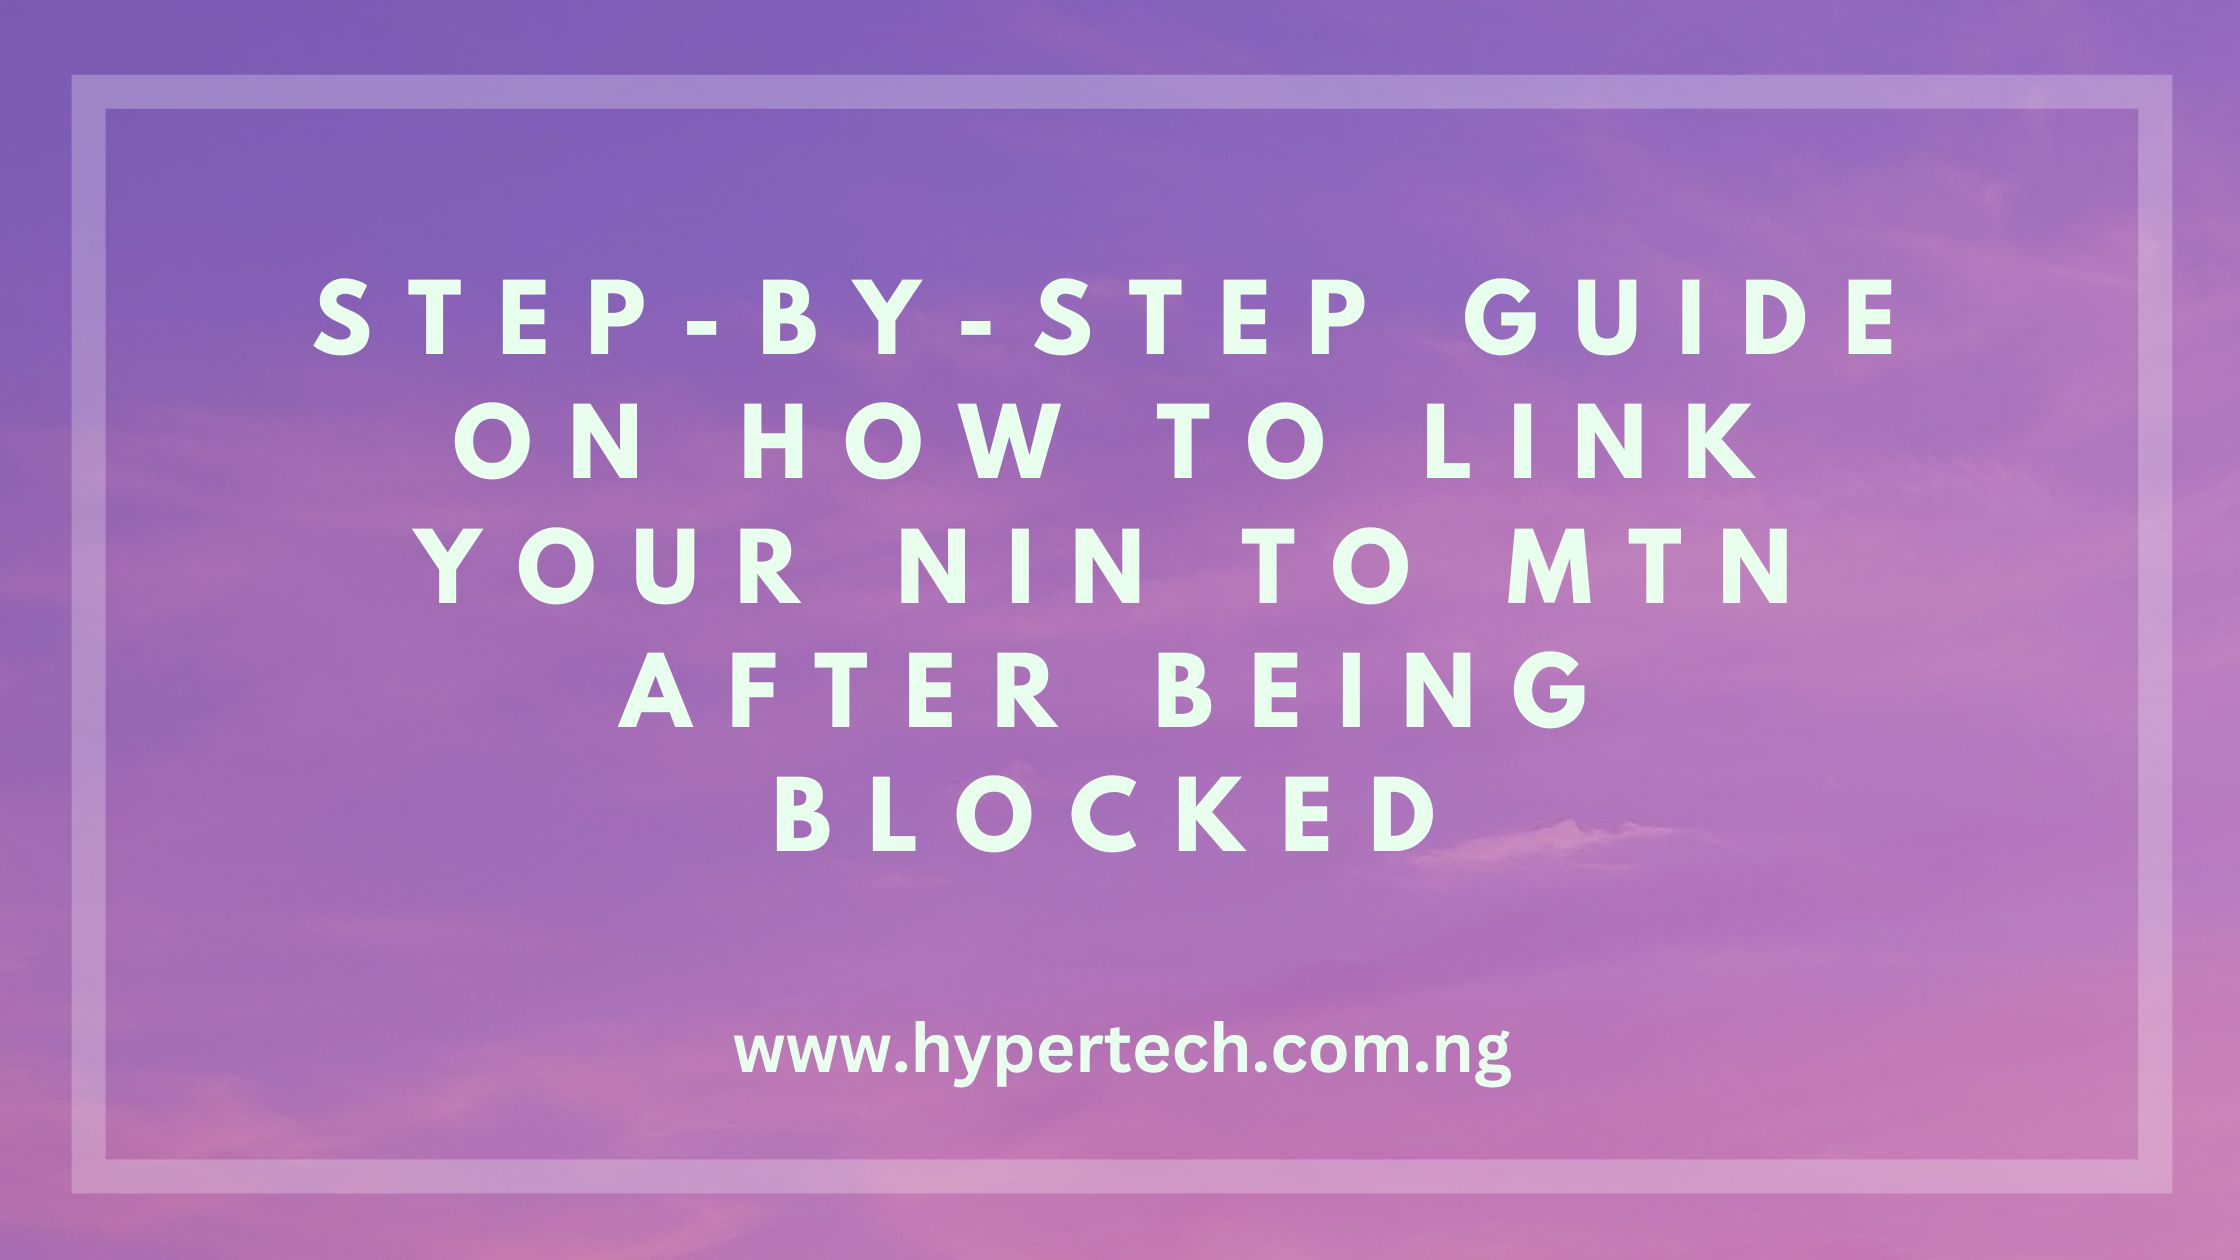 How to Link Your NIN to MTN After Being Blocked